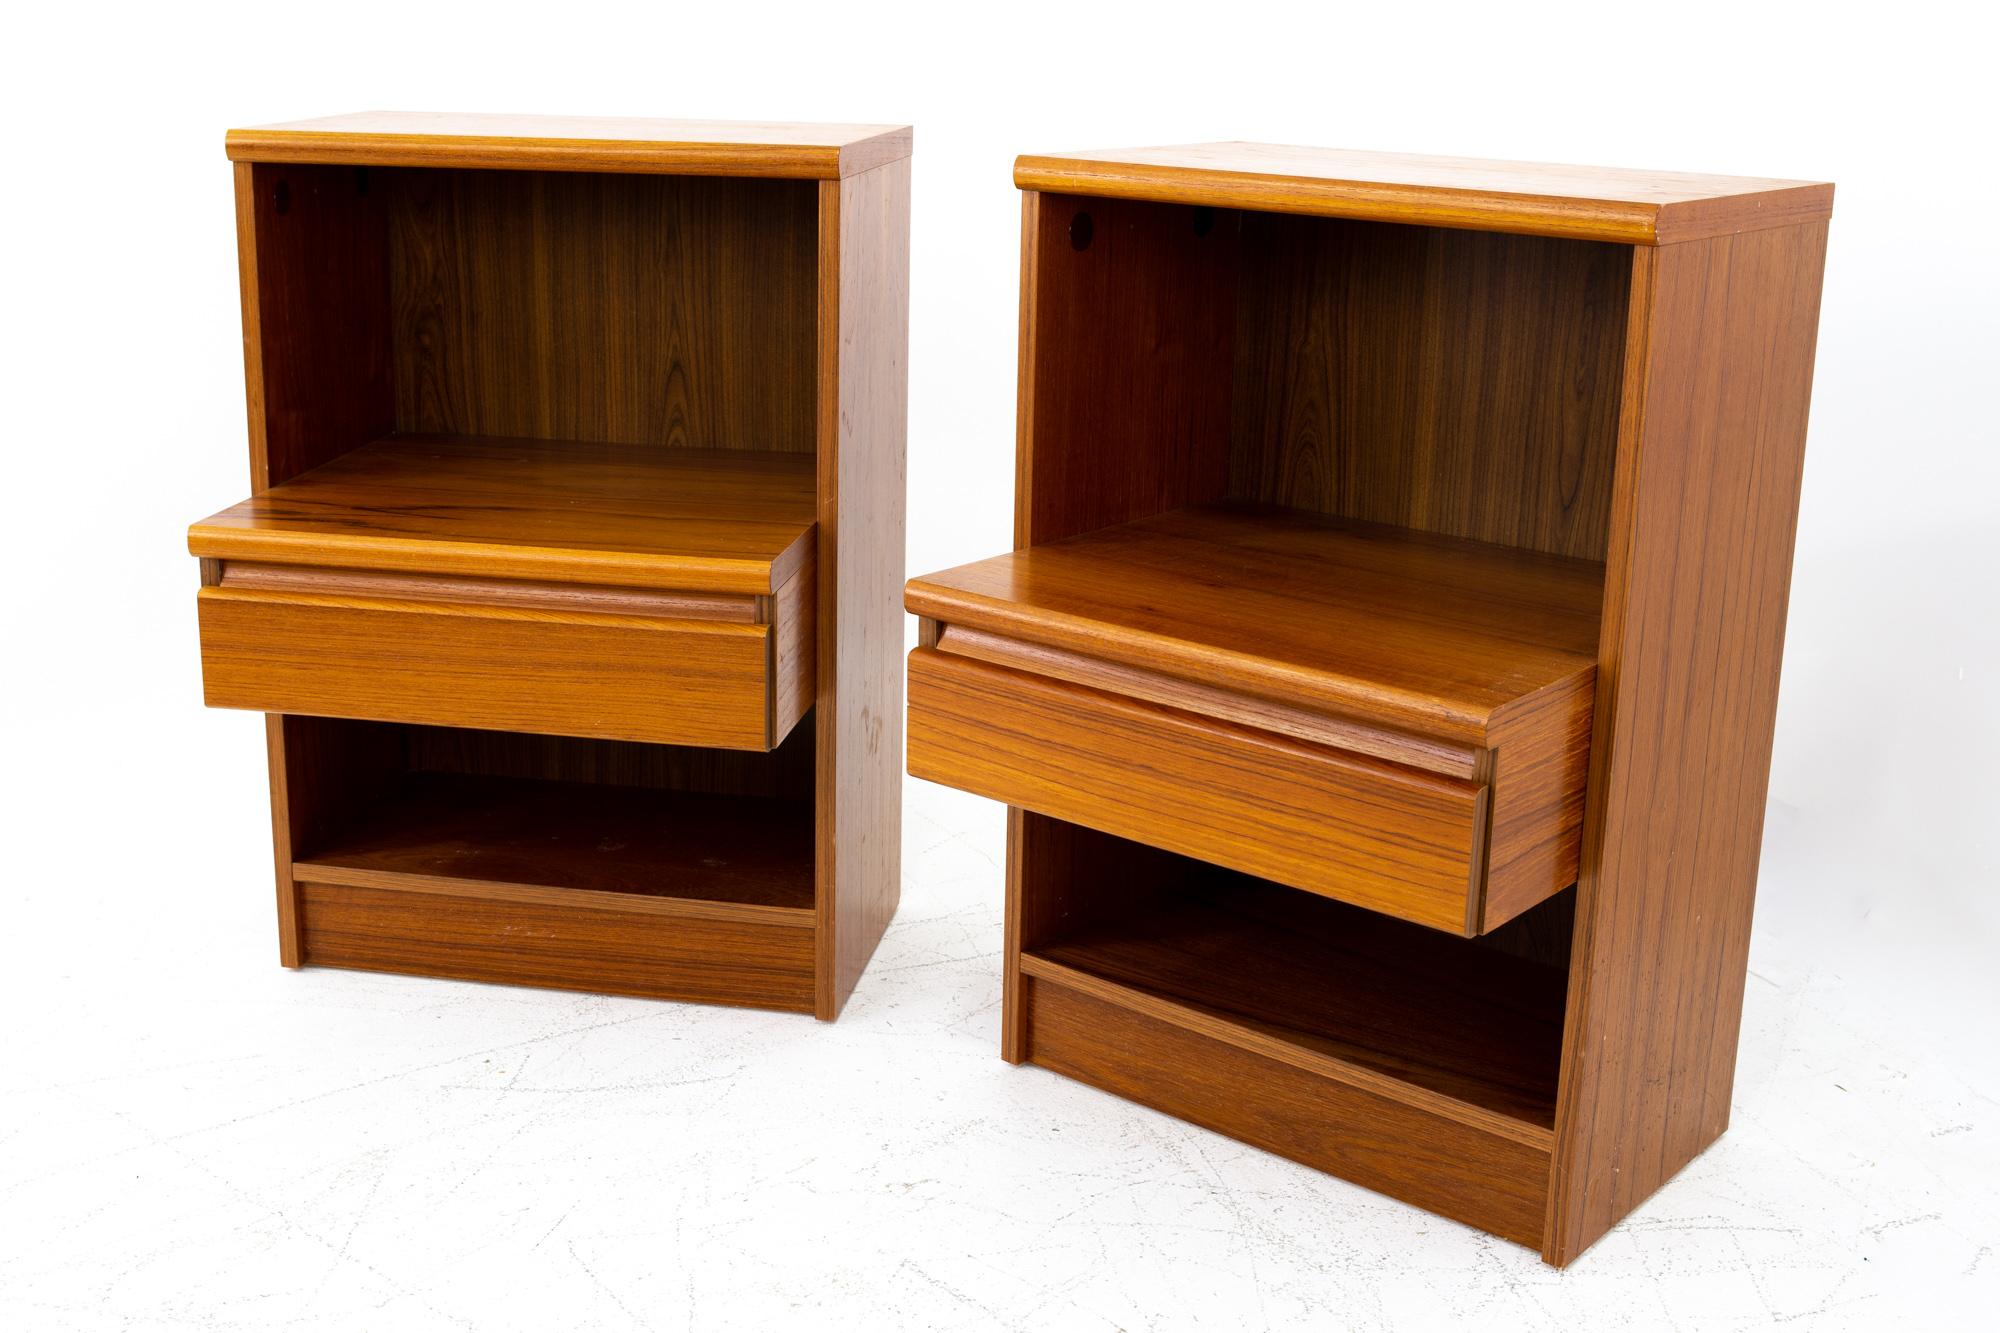 Mid century teak step nightstands - pair
Each nightstand measures: 20 wide x 16.75 deep x 28.75 high

All pieces of furniture can be had in what we call restored vintage condition. That means the piece is restored upon purchase so it’s free of